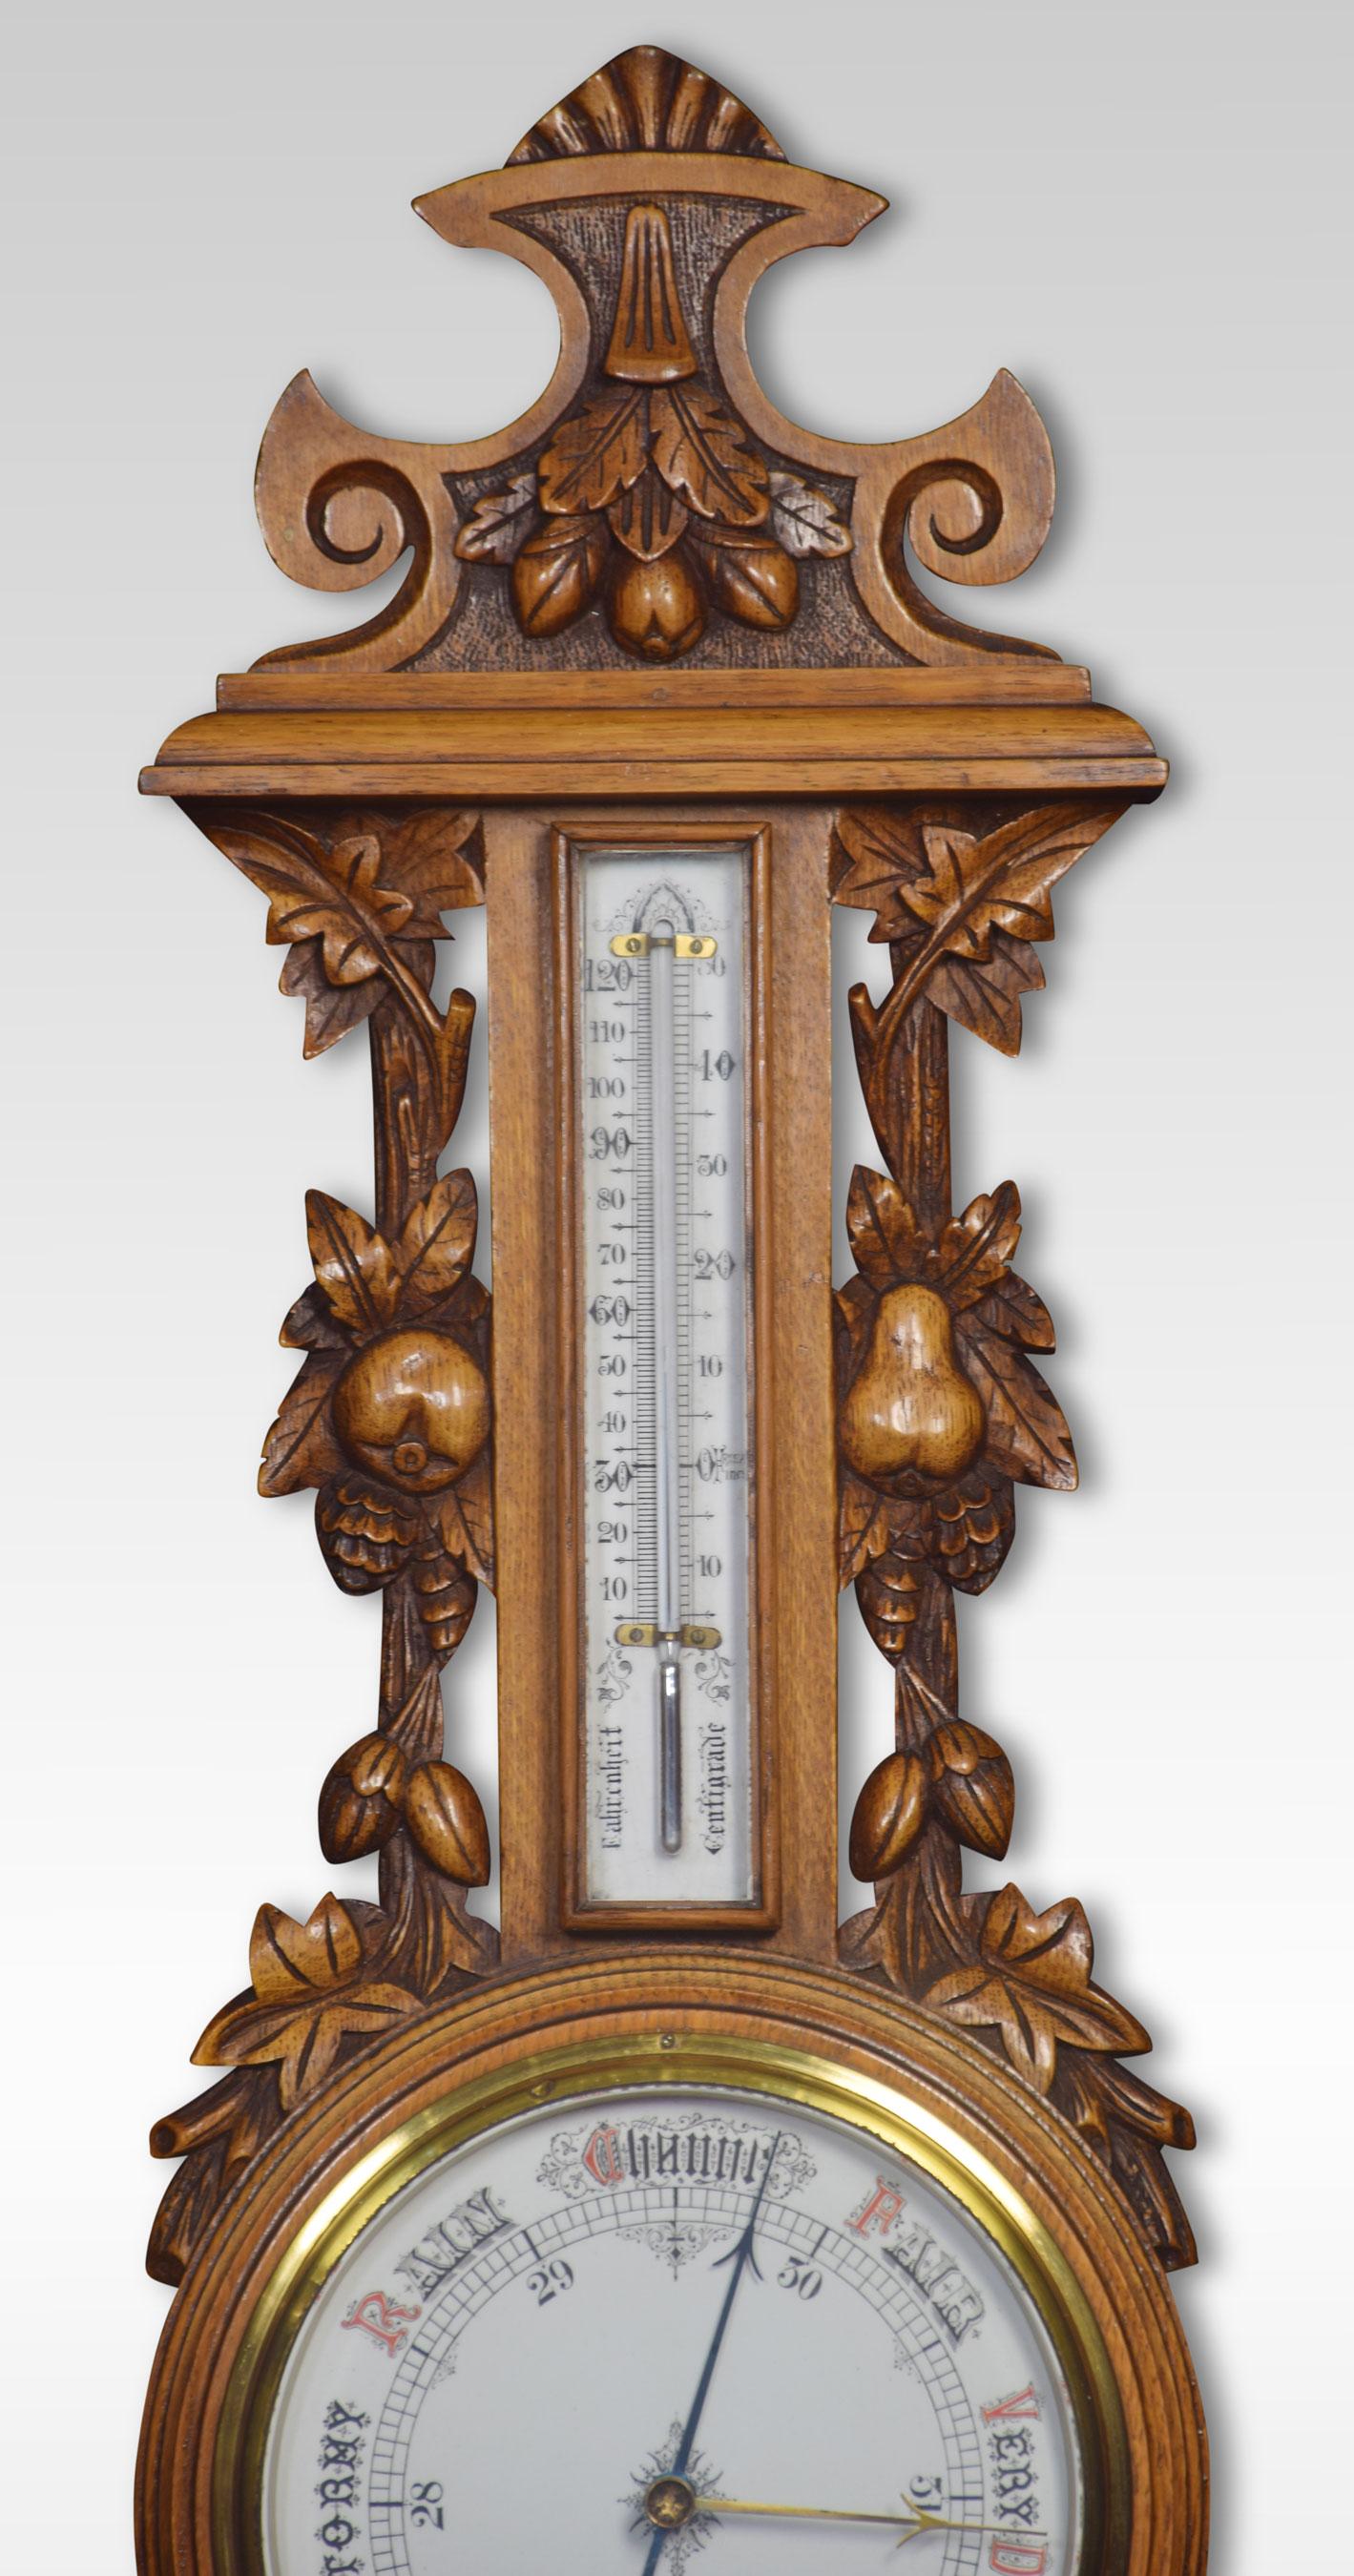 Carved oak wheel barometer, with a moulded pediment and scrolling decoration above a thermometer flanked by carved columns, the barometer with white enamel dial.
Dimensions:
Height 35 inches
Width 11 inches
Depth 3 inches.